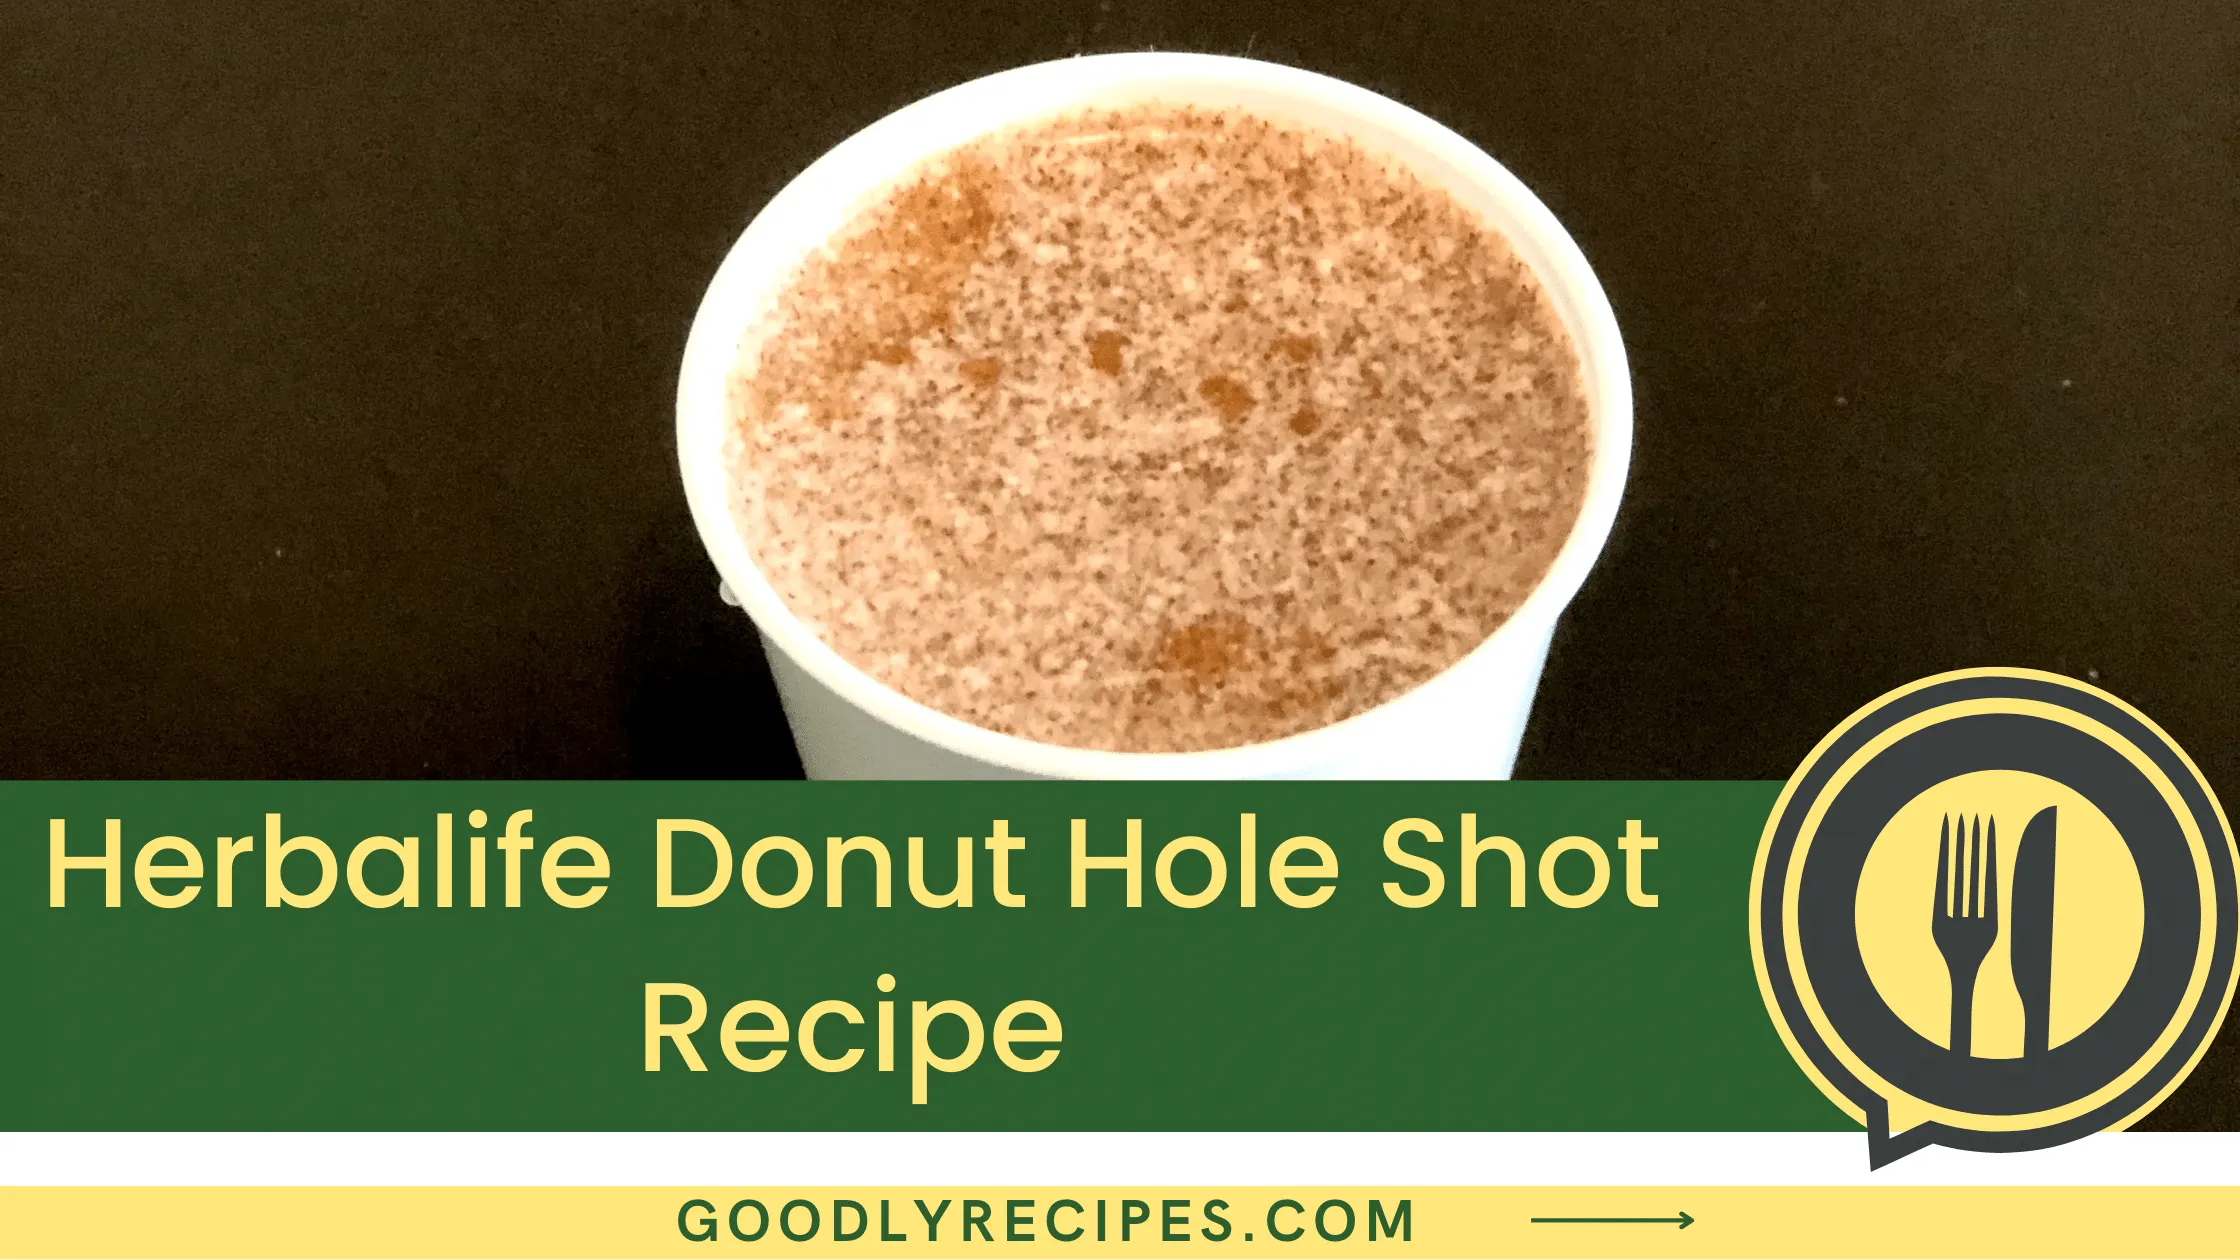 What is Herbalife Donut Hole Shot?